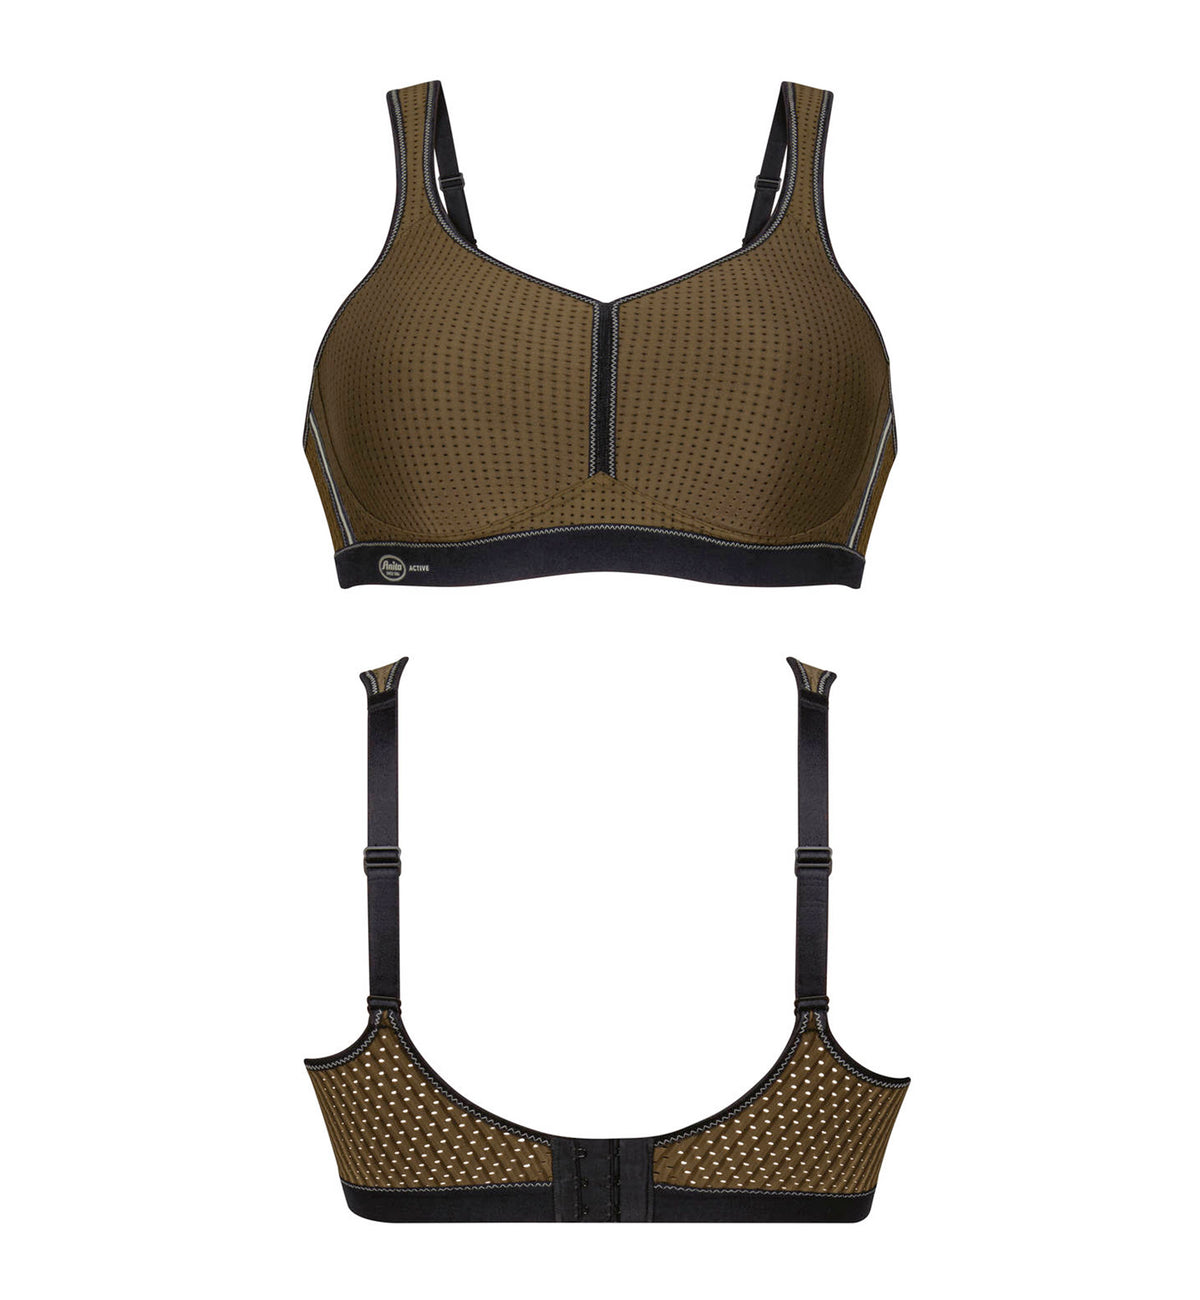 Mesh Support Softcup Bra